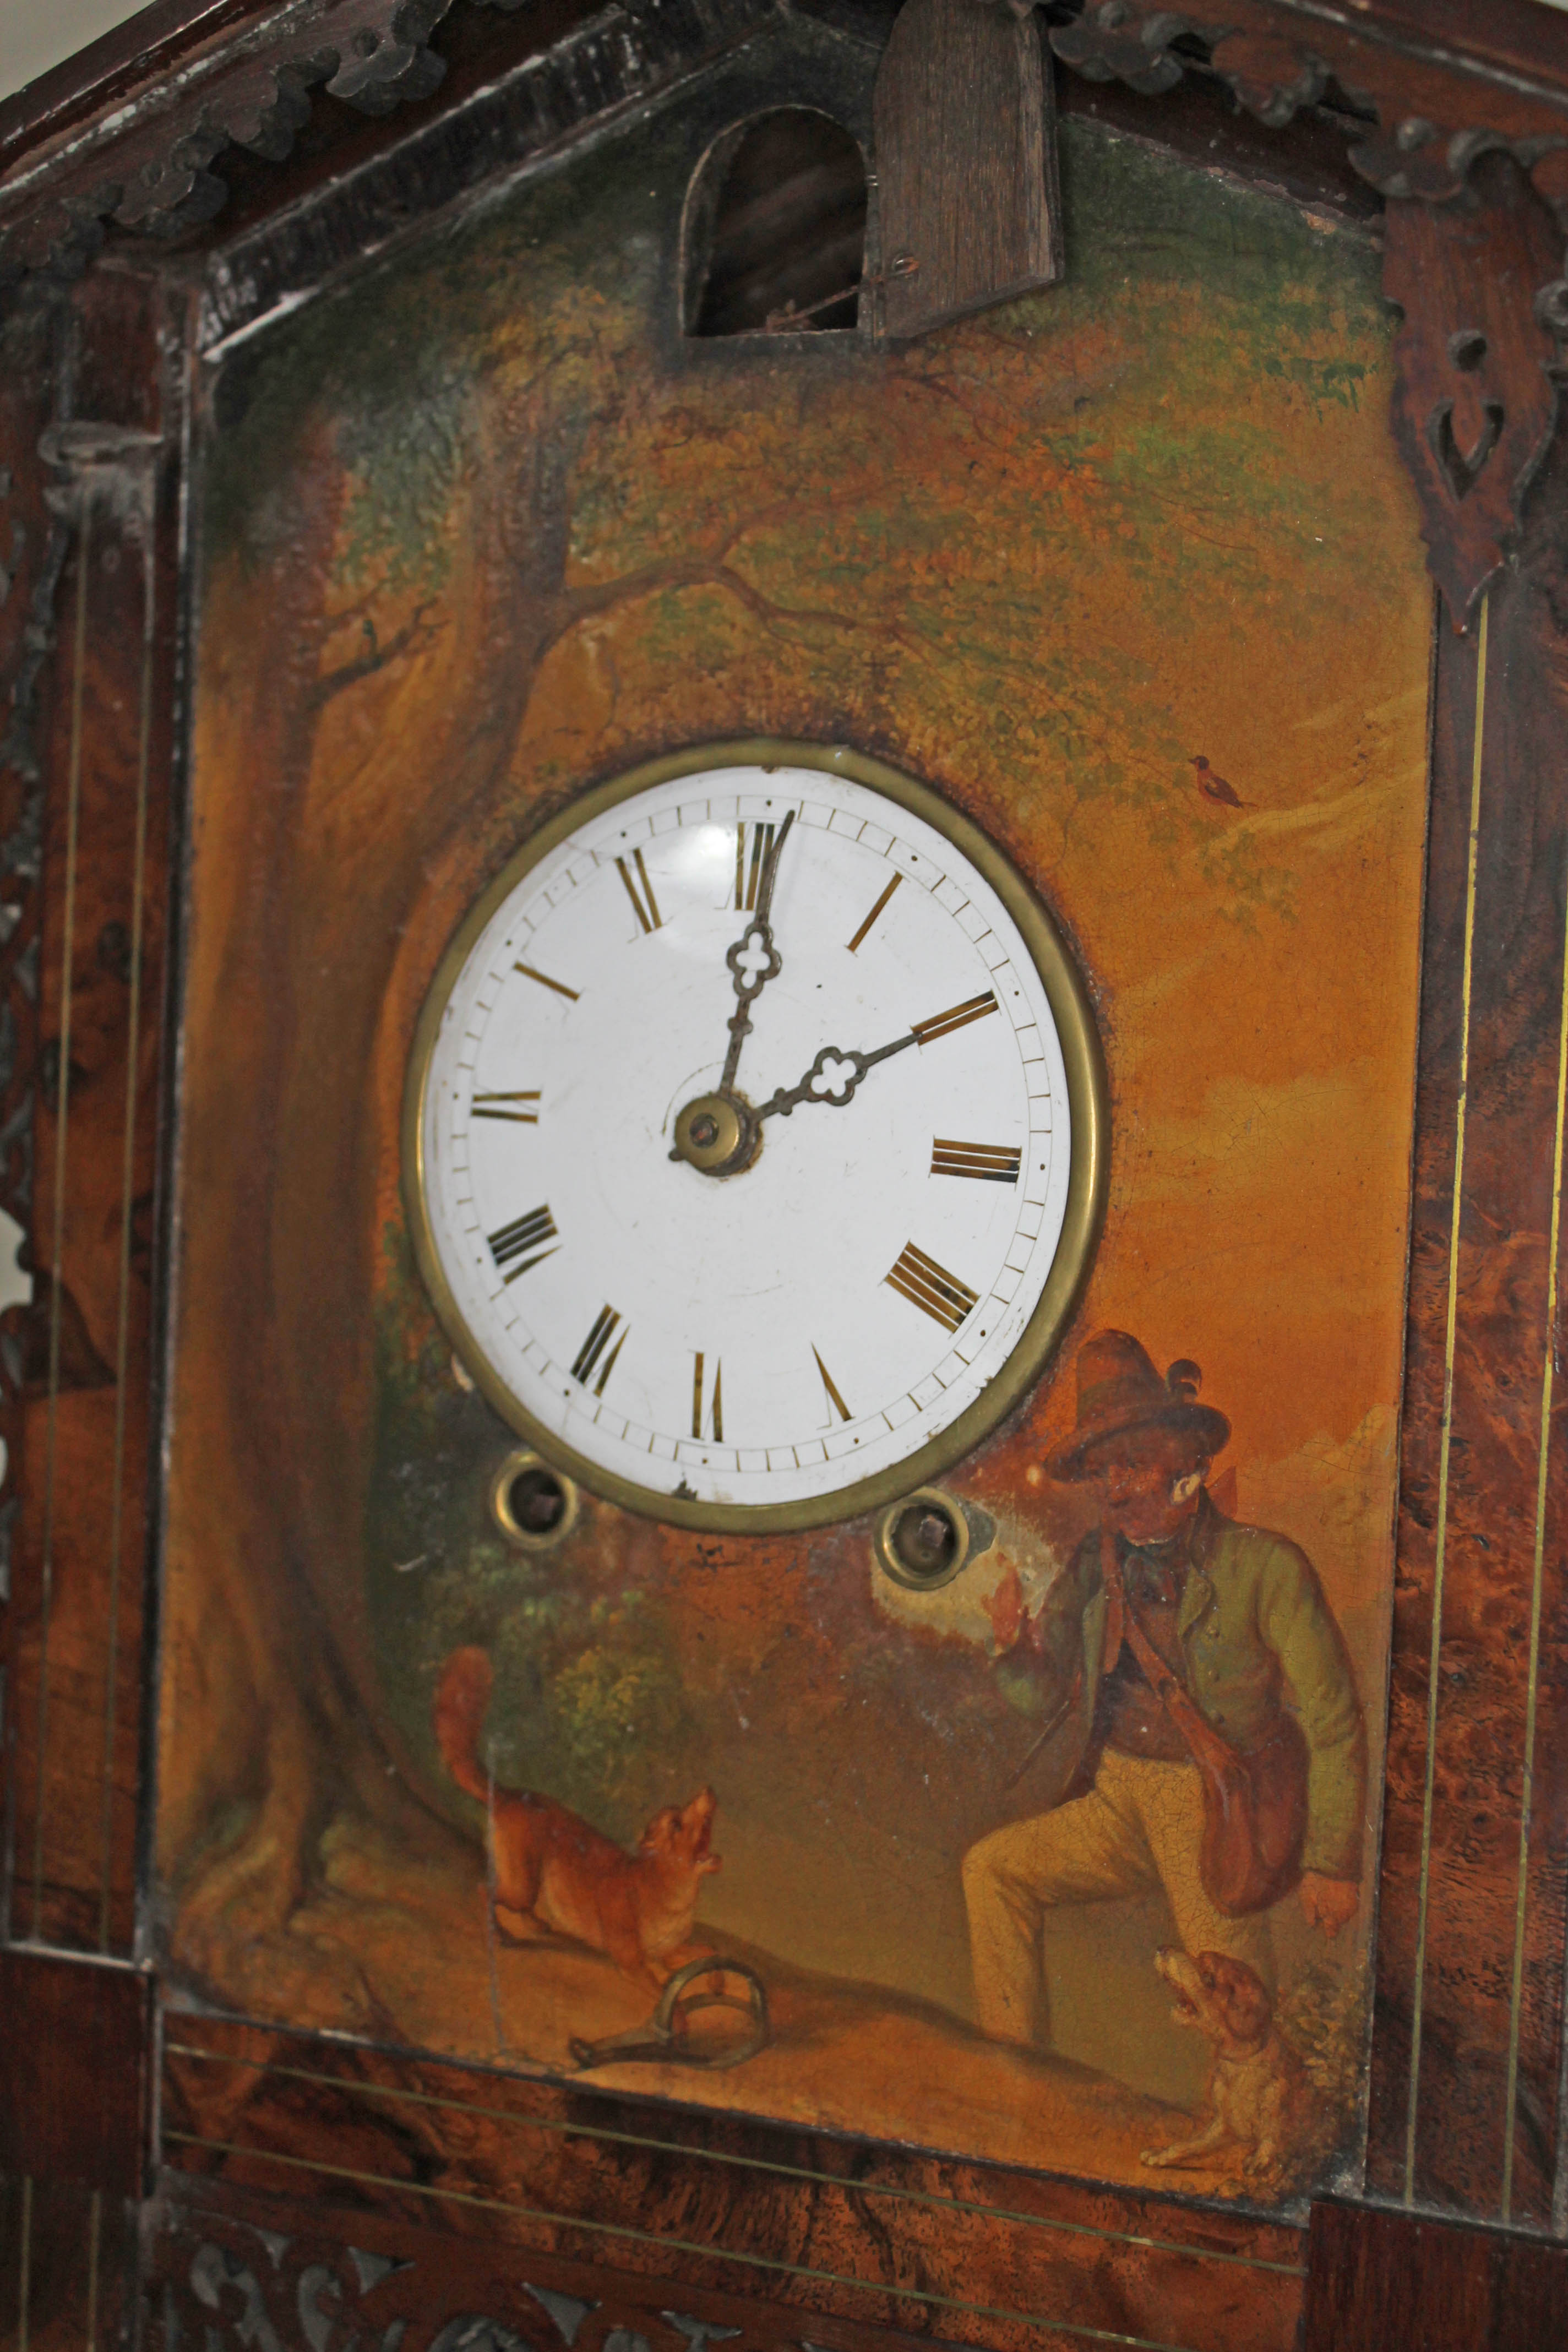 A 19th century Black Forest walnut cuckoo clock, chalet style case with fretwork, 4 1/4" dial - Image 10 of 12